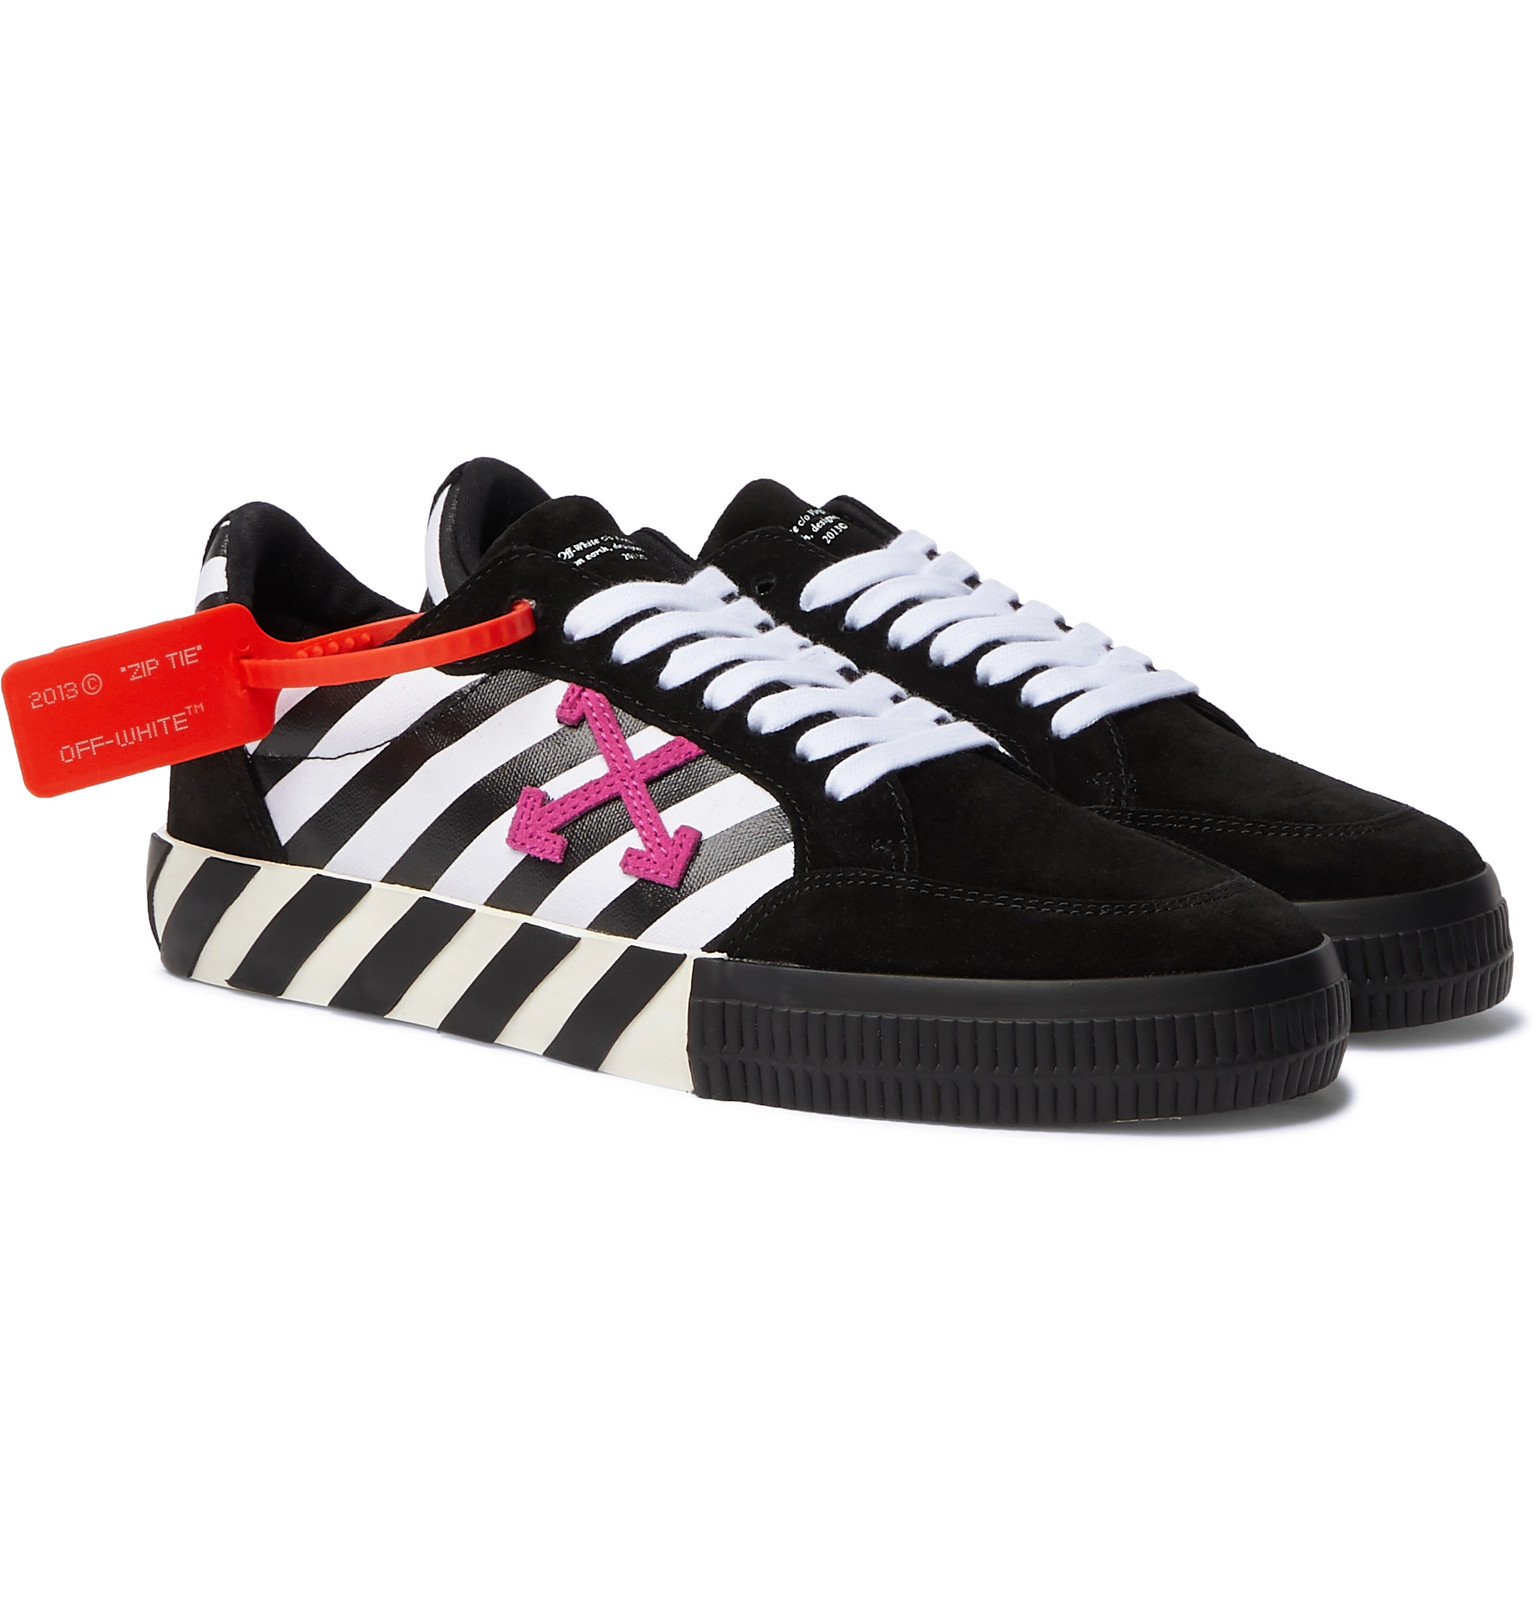 Off-White - Striped Canvas and Suede Sneakers - Men - Black | The ...